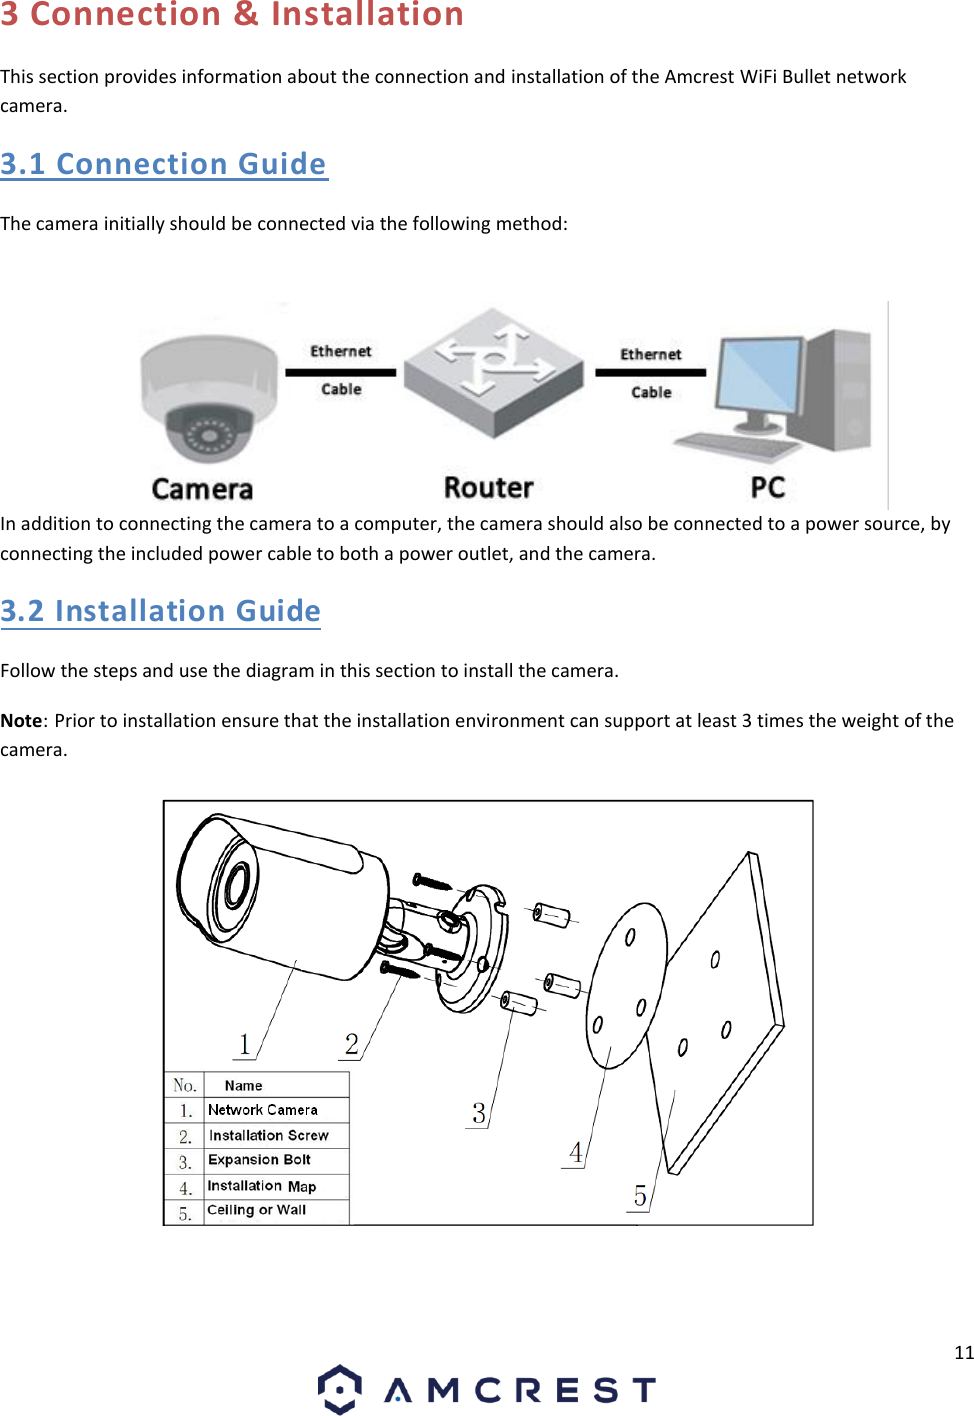 11 3 Connection &amp; Installation This section provides information about the connection and installation of the Amcrest WiFi Bullet network camera. 3.1 Connection Guide The camera initially should be connected via the following method: In addition to connecting the camera to a computer, the camera should also be connected to a power source, by connecting the included power cable to both a power outlet, and the camera. 3.2 Installation Guide Follow the steps and use the diagram in this section to install the camera. Note: Prior to installation ensure that the installation environment can support at least 3 times the weight of the camera. 